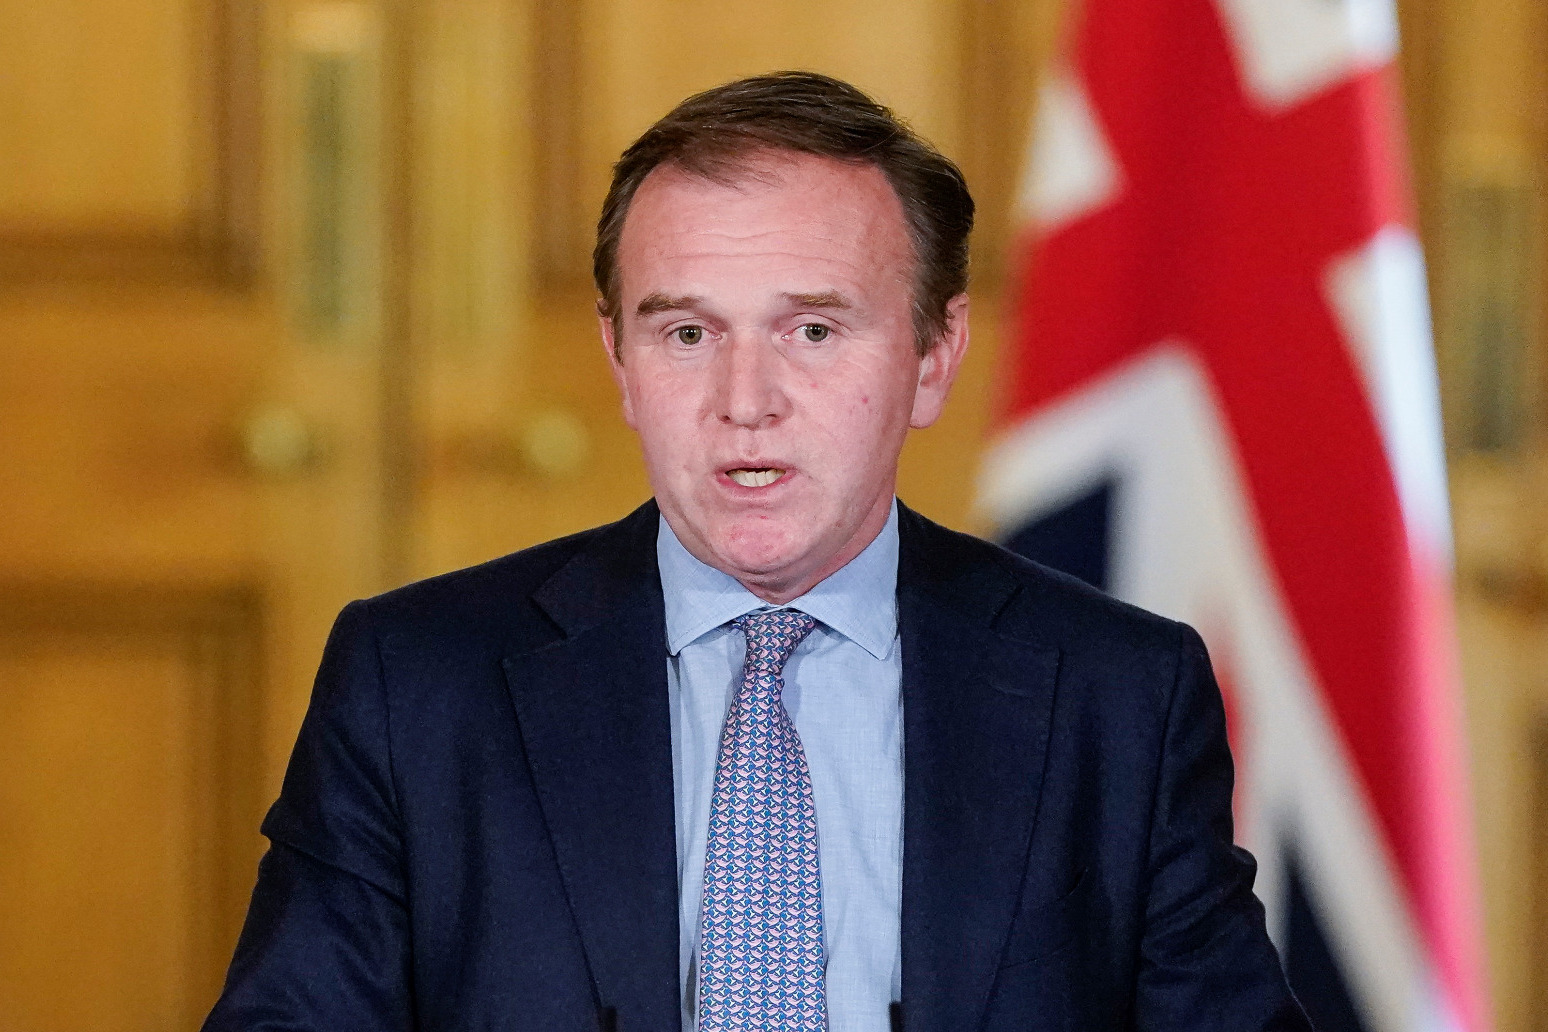 Former Cabinet minister George Eustice has announced he will step down at the next General Election 